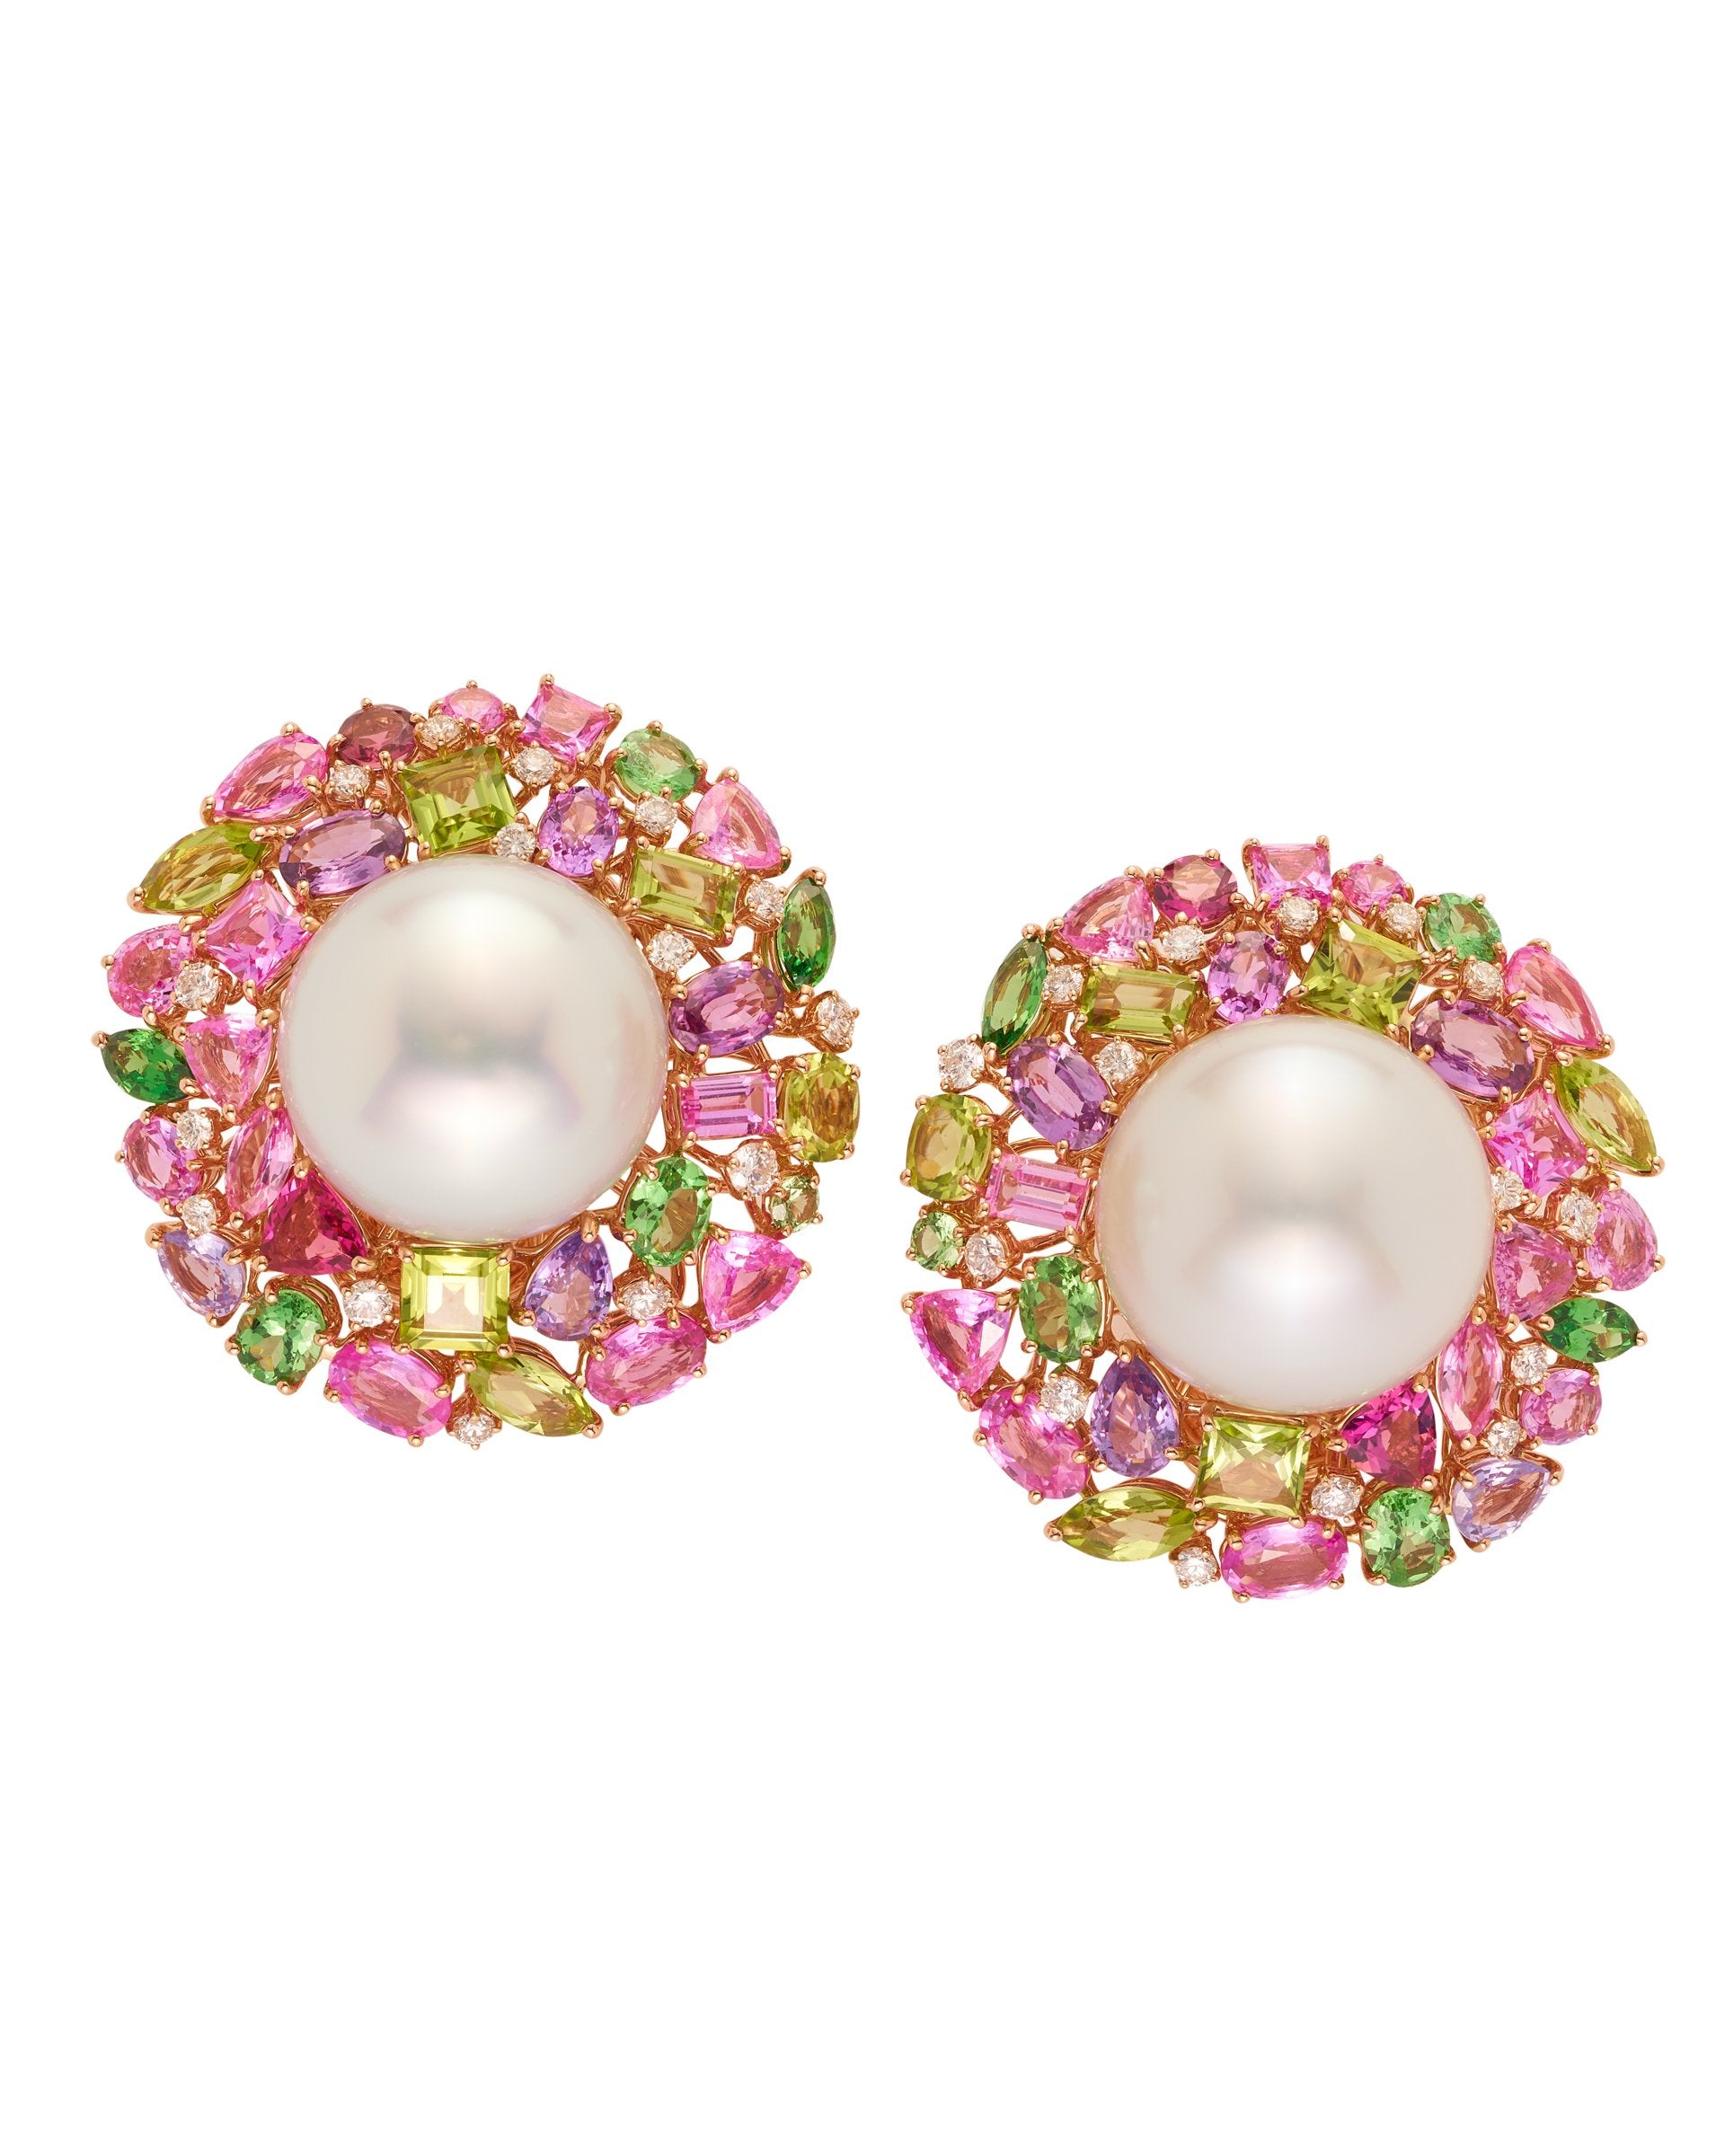 "Swirl" pink and green, pearl earrings, crafted in 18 karat rose and white gold.